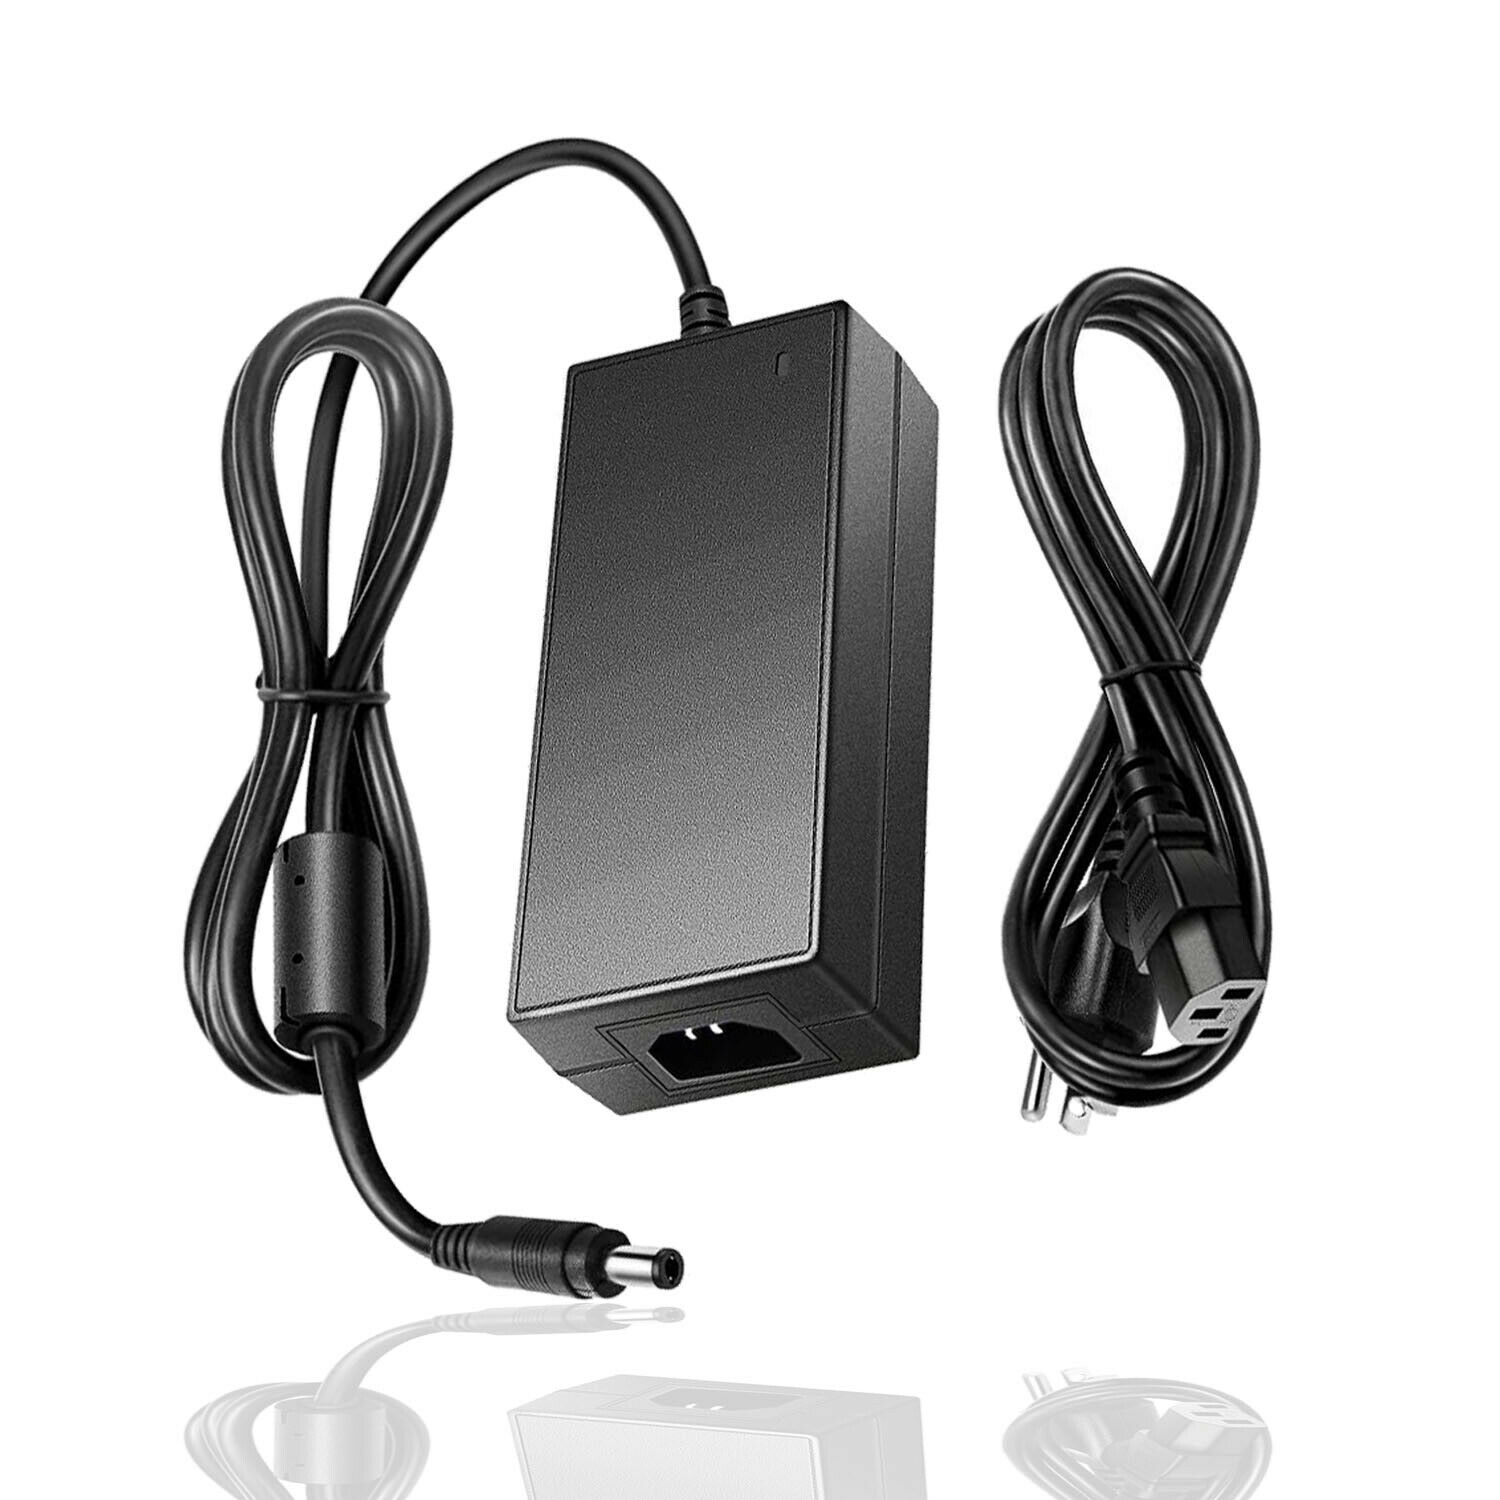 24V AC Adapter For Zebra ZD510-HC Wristband Printer Power Supply Cable Cord Compatible Brand: For Zebra ZD510-HC Wri